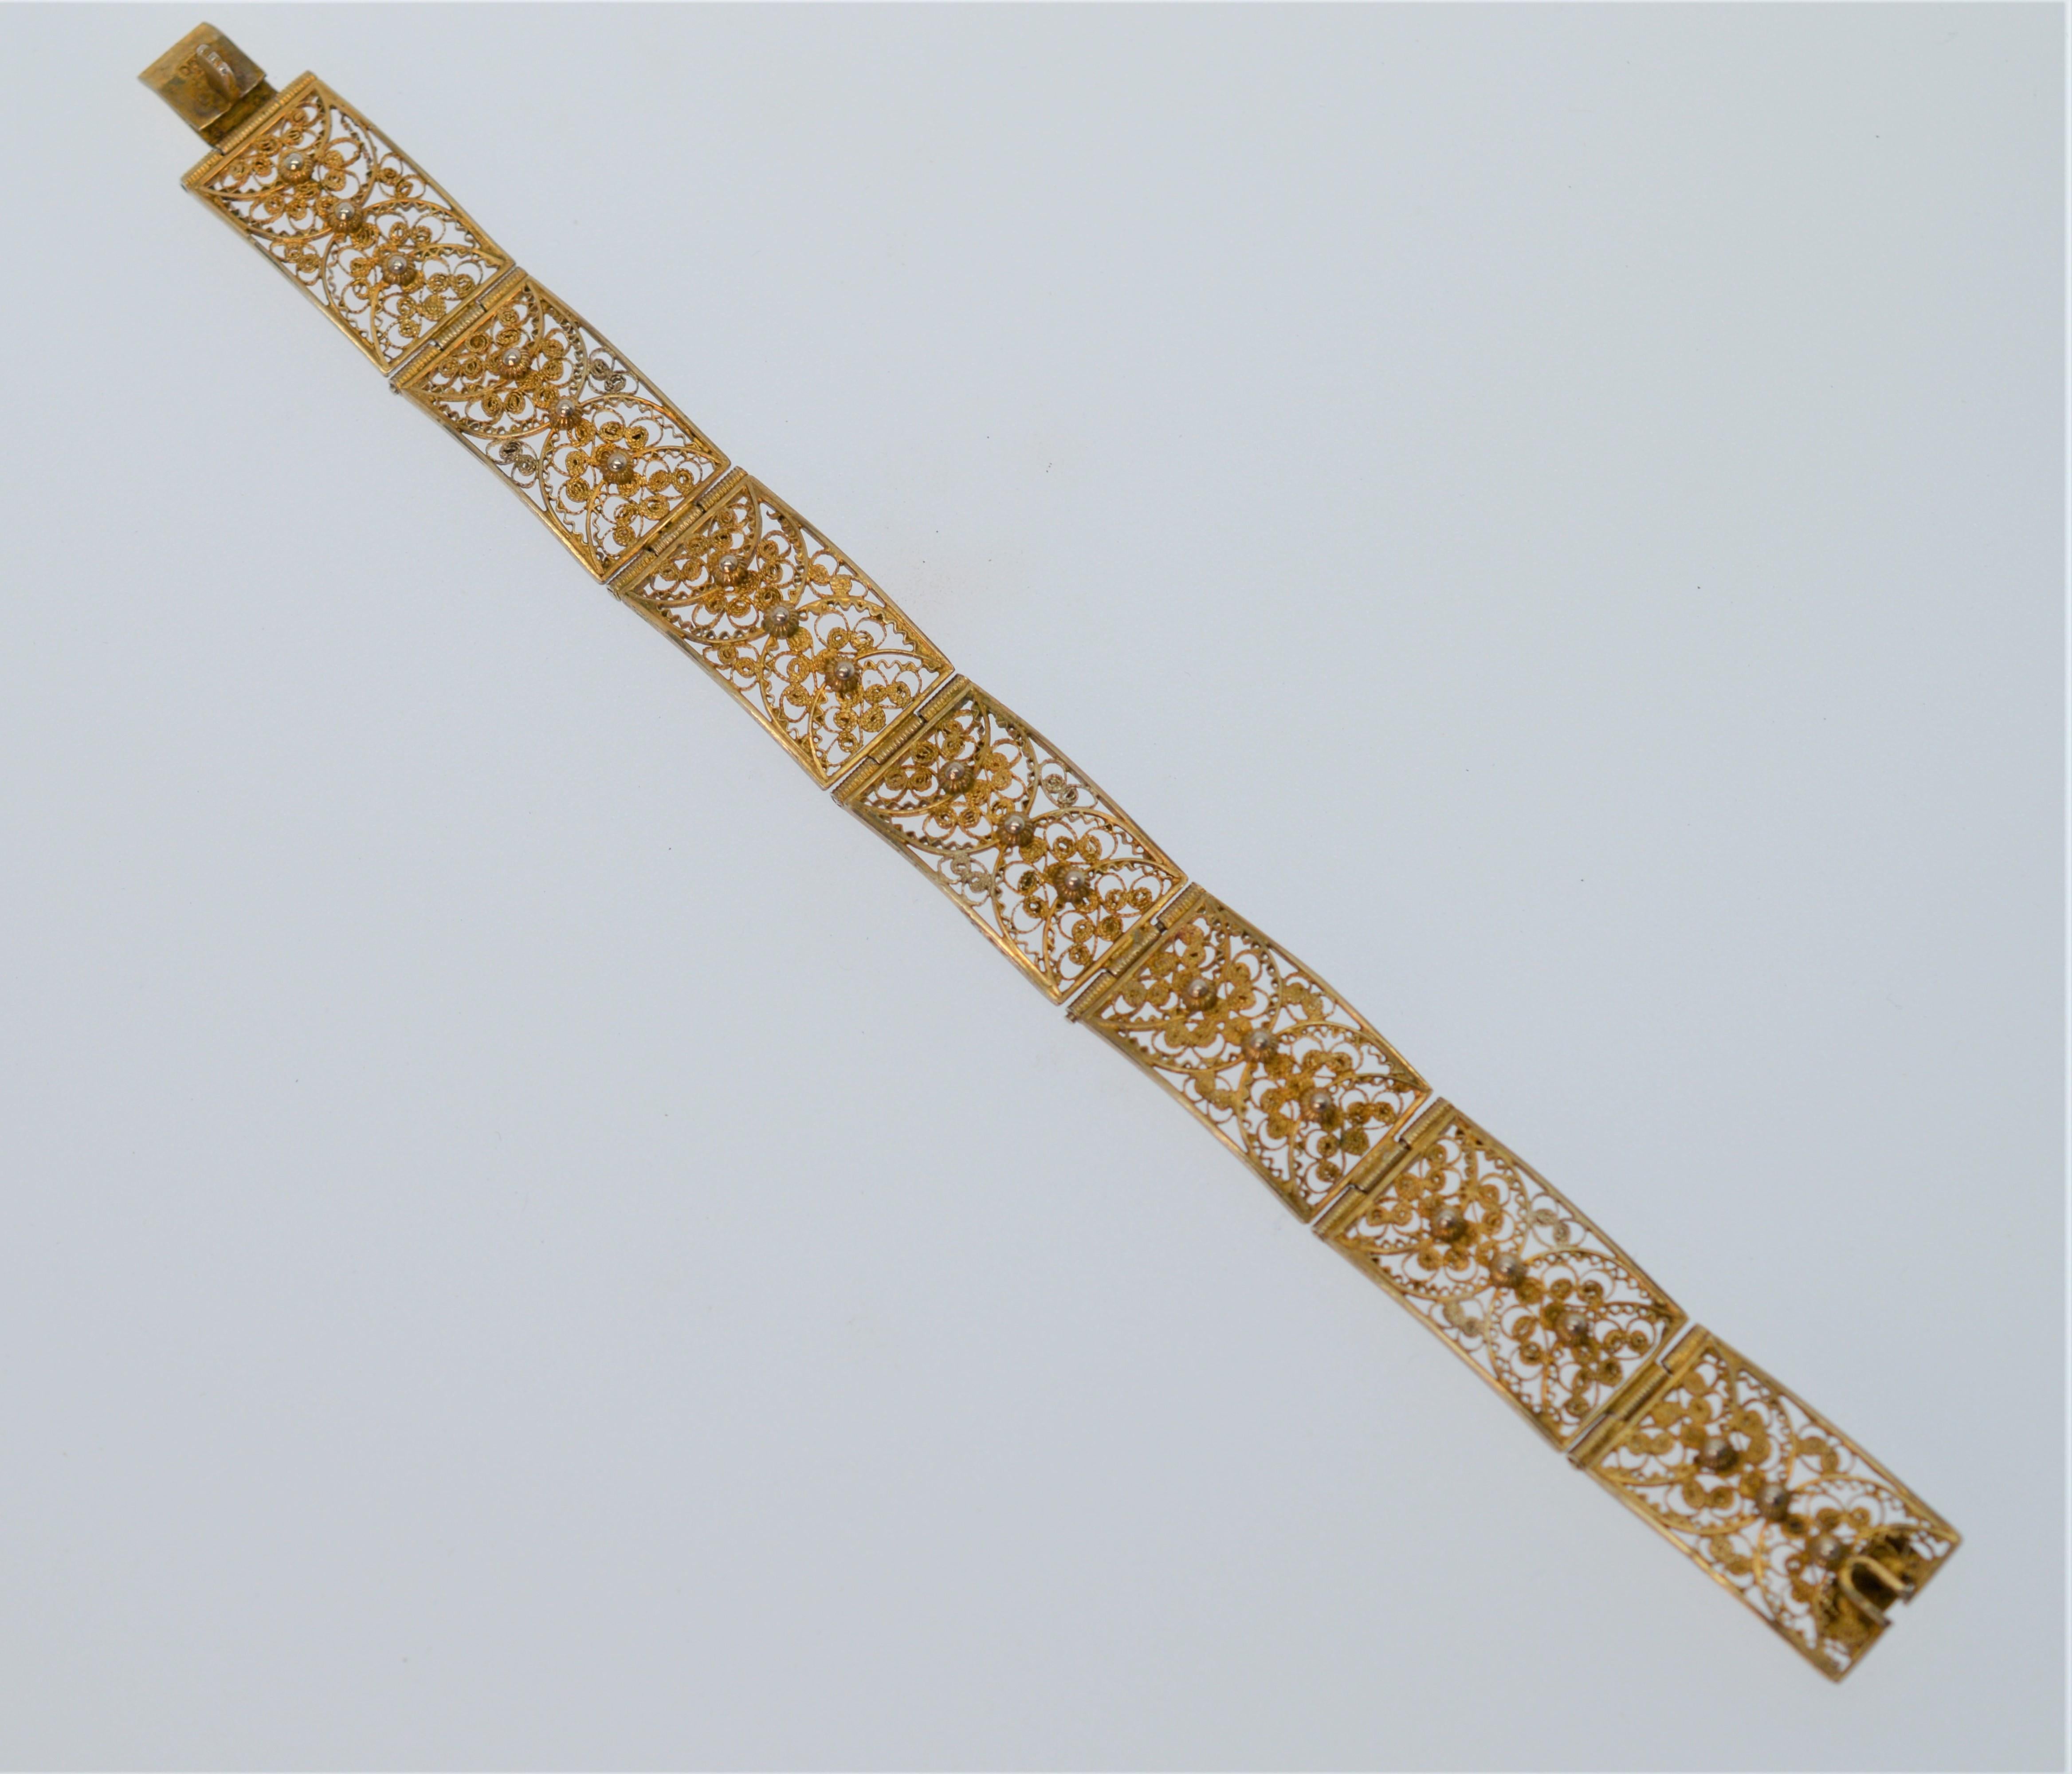 Handmade in India, this seven inch bracelet is crafted of seven hinged Gold Plated Sterling Silver Links each 1 x 1/2 inch of a delicate filigree design.
Great vintage toning. Has a simple snap clasp closure. In Gift Box. 